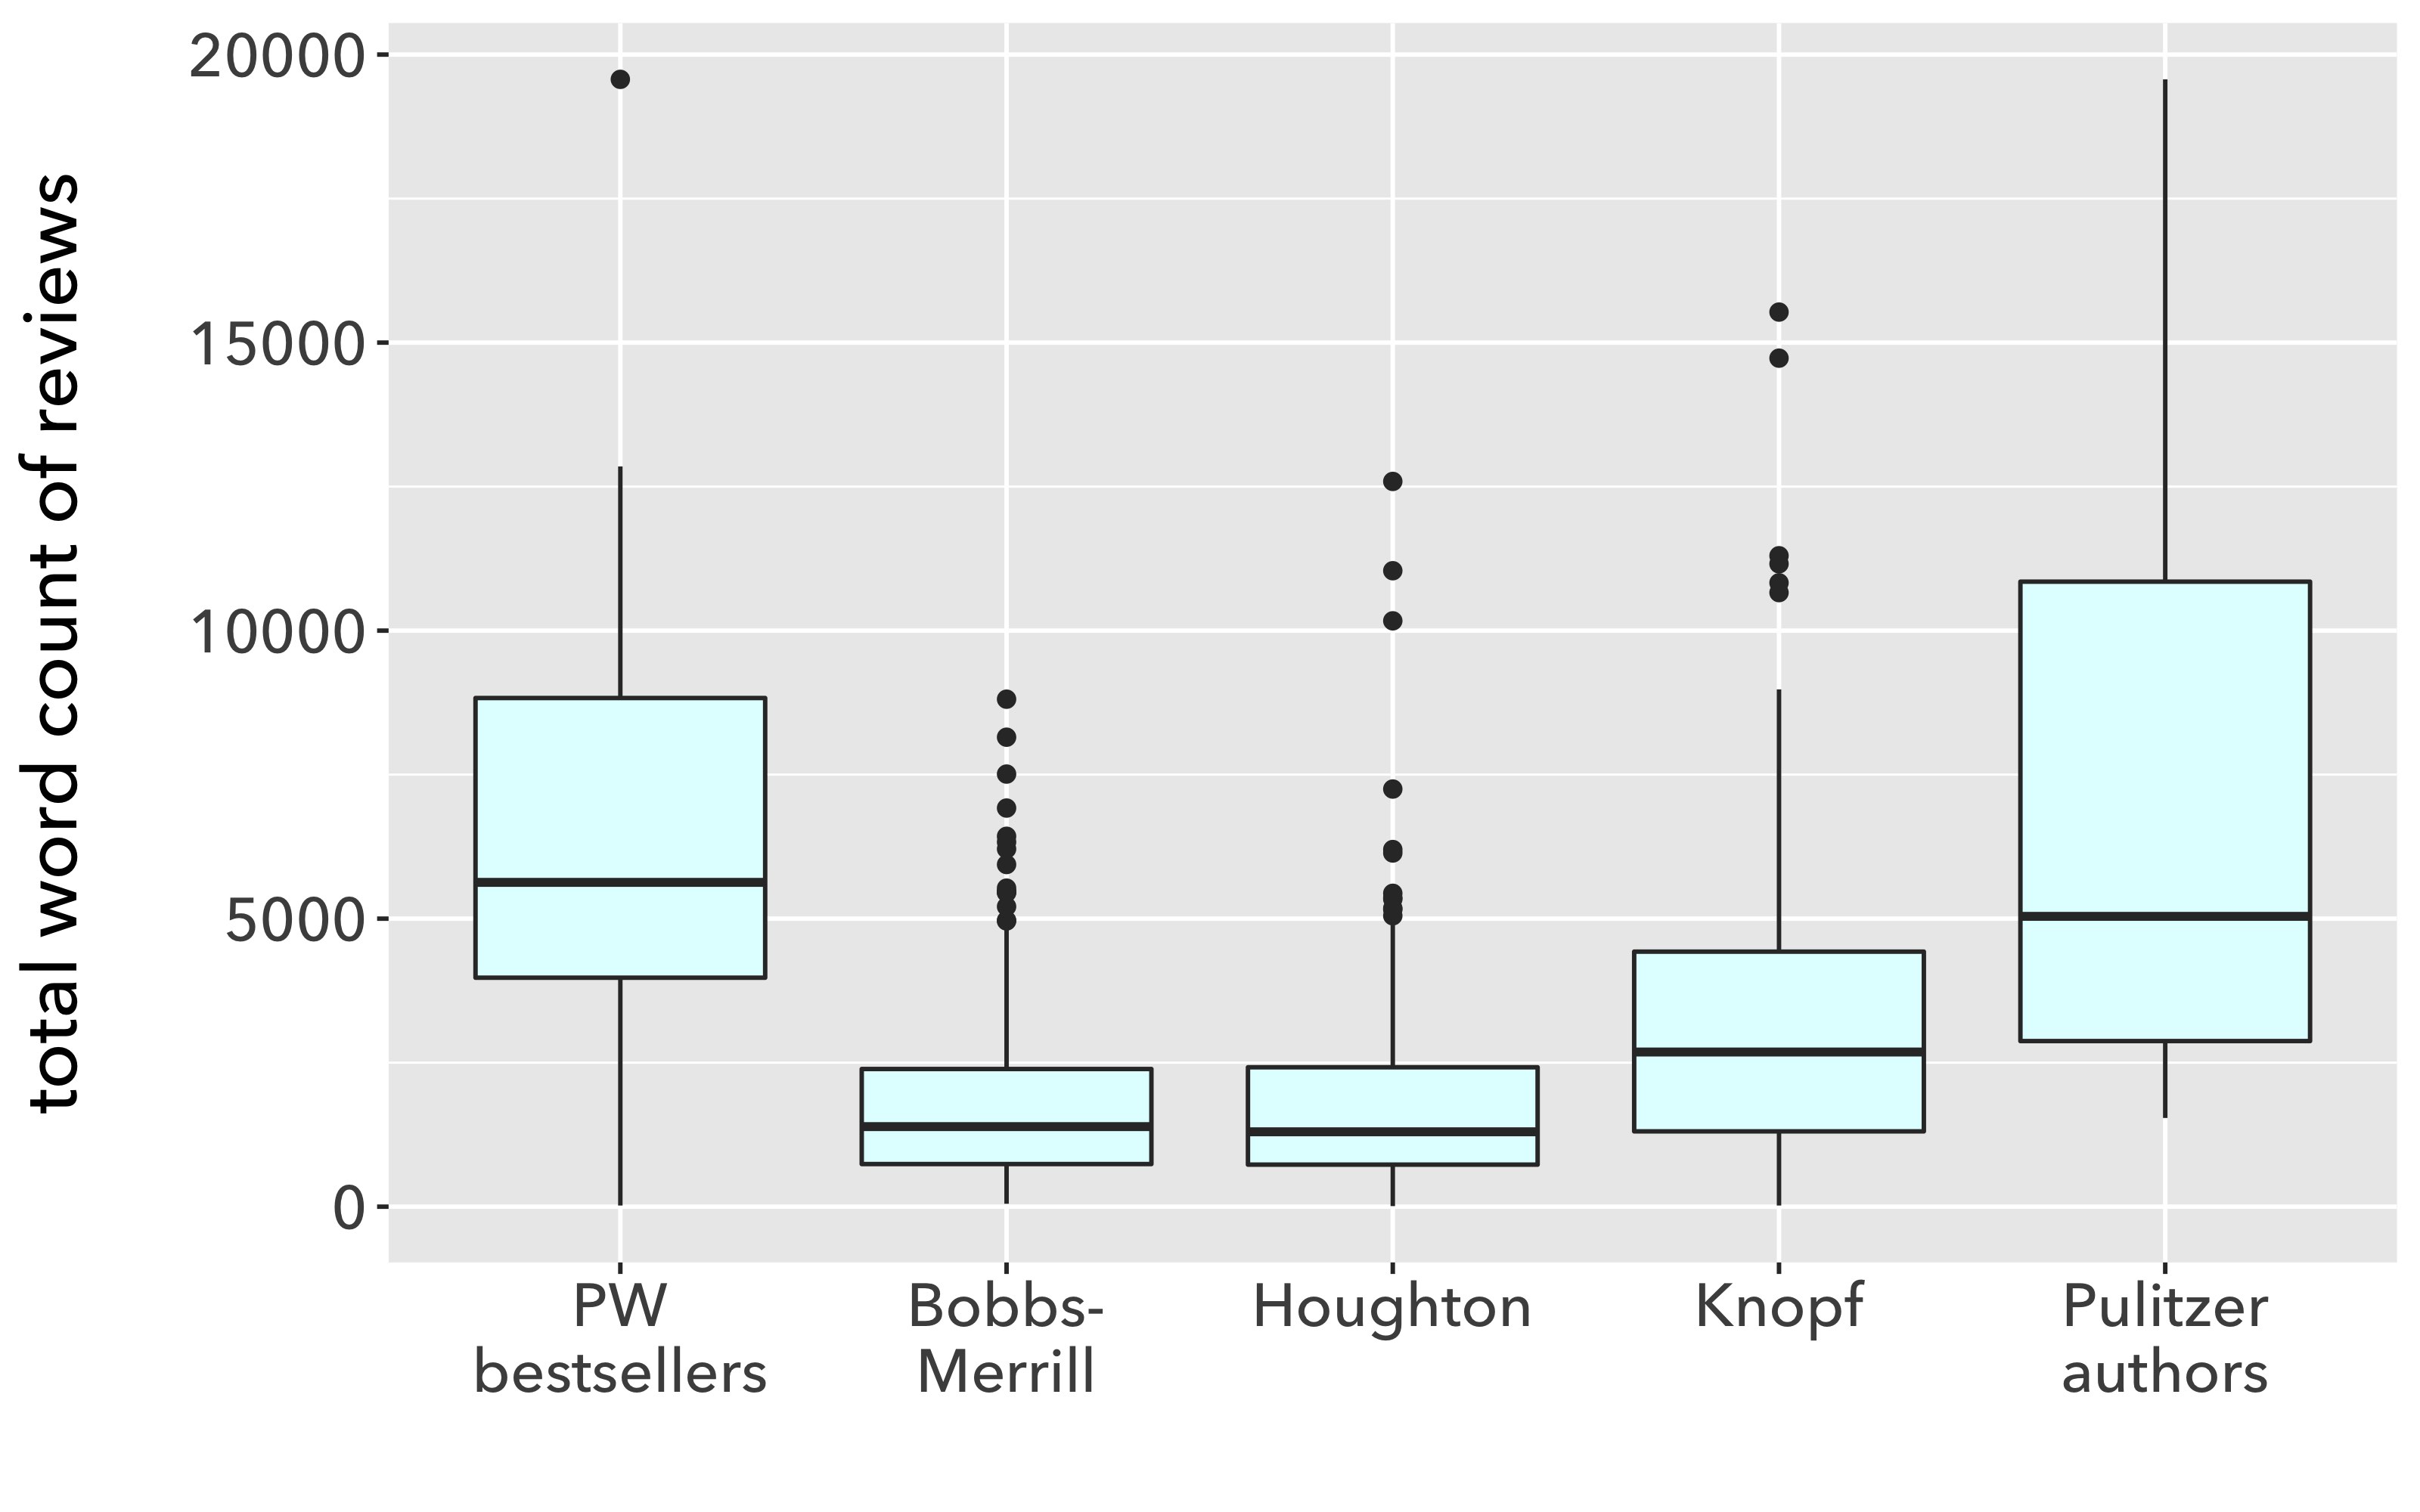 Word count boxplots, with similar medians.